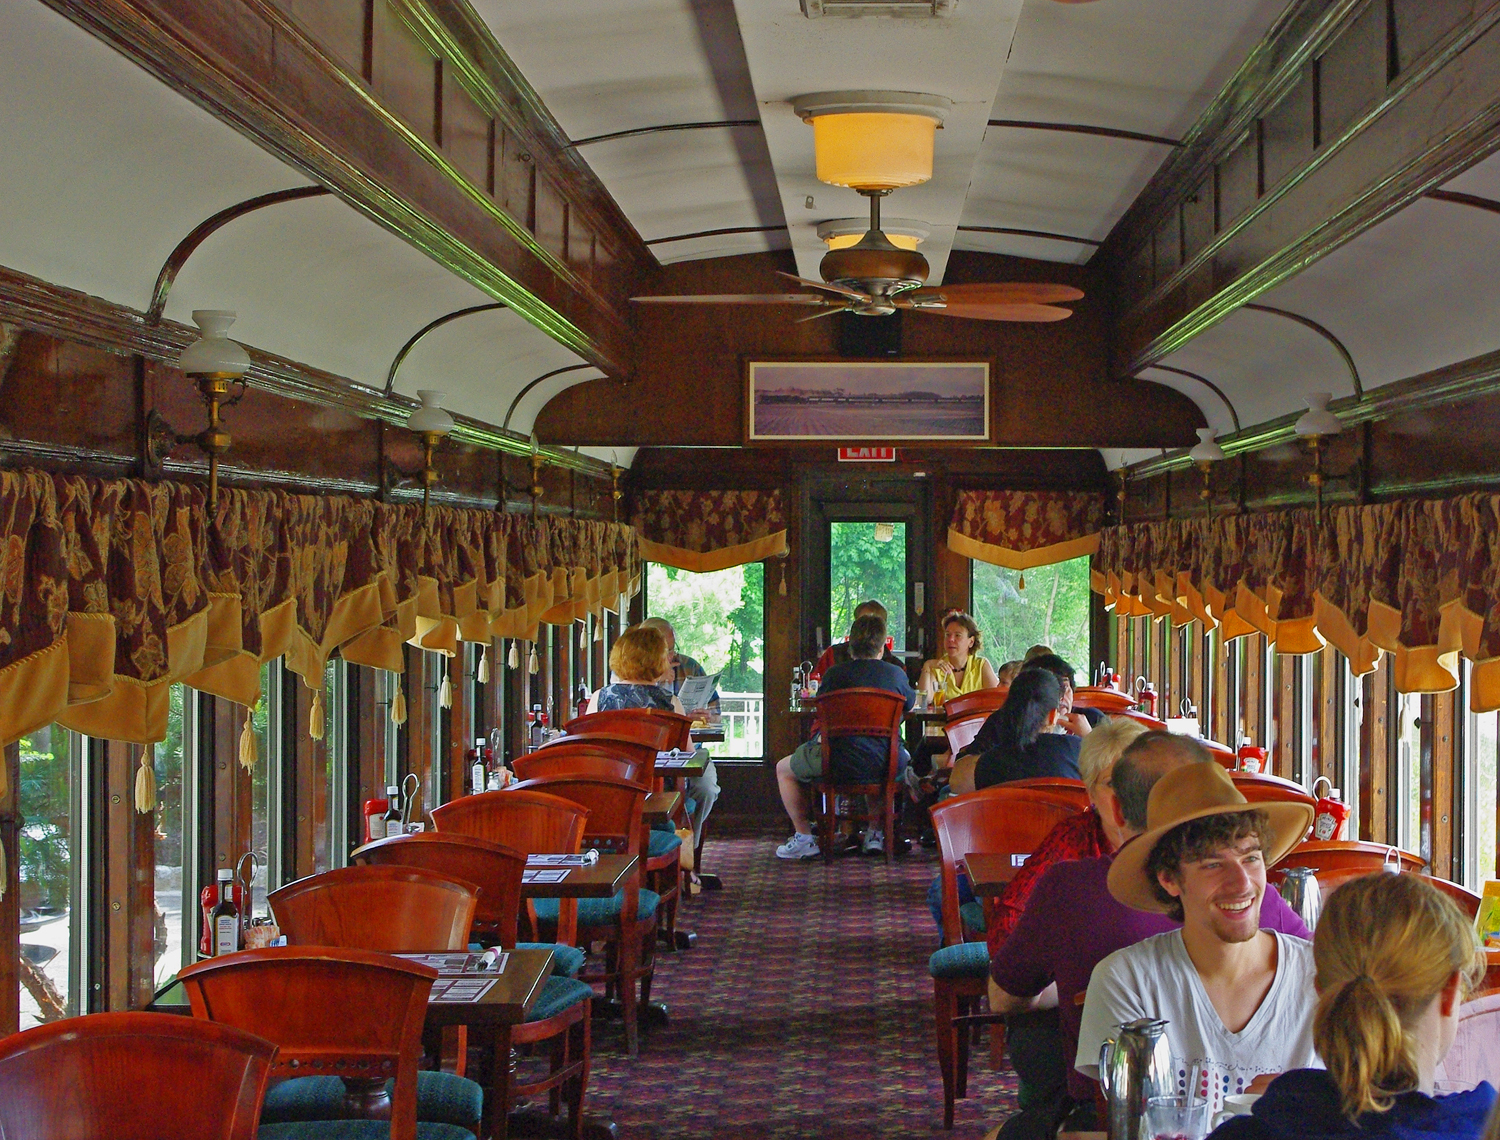 The Railroad Dining Car Diner